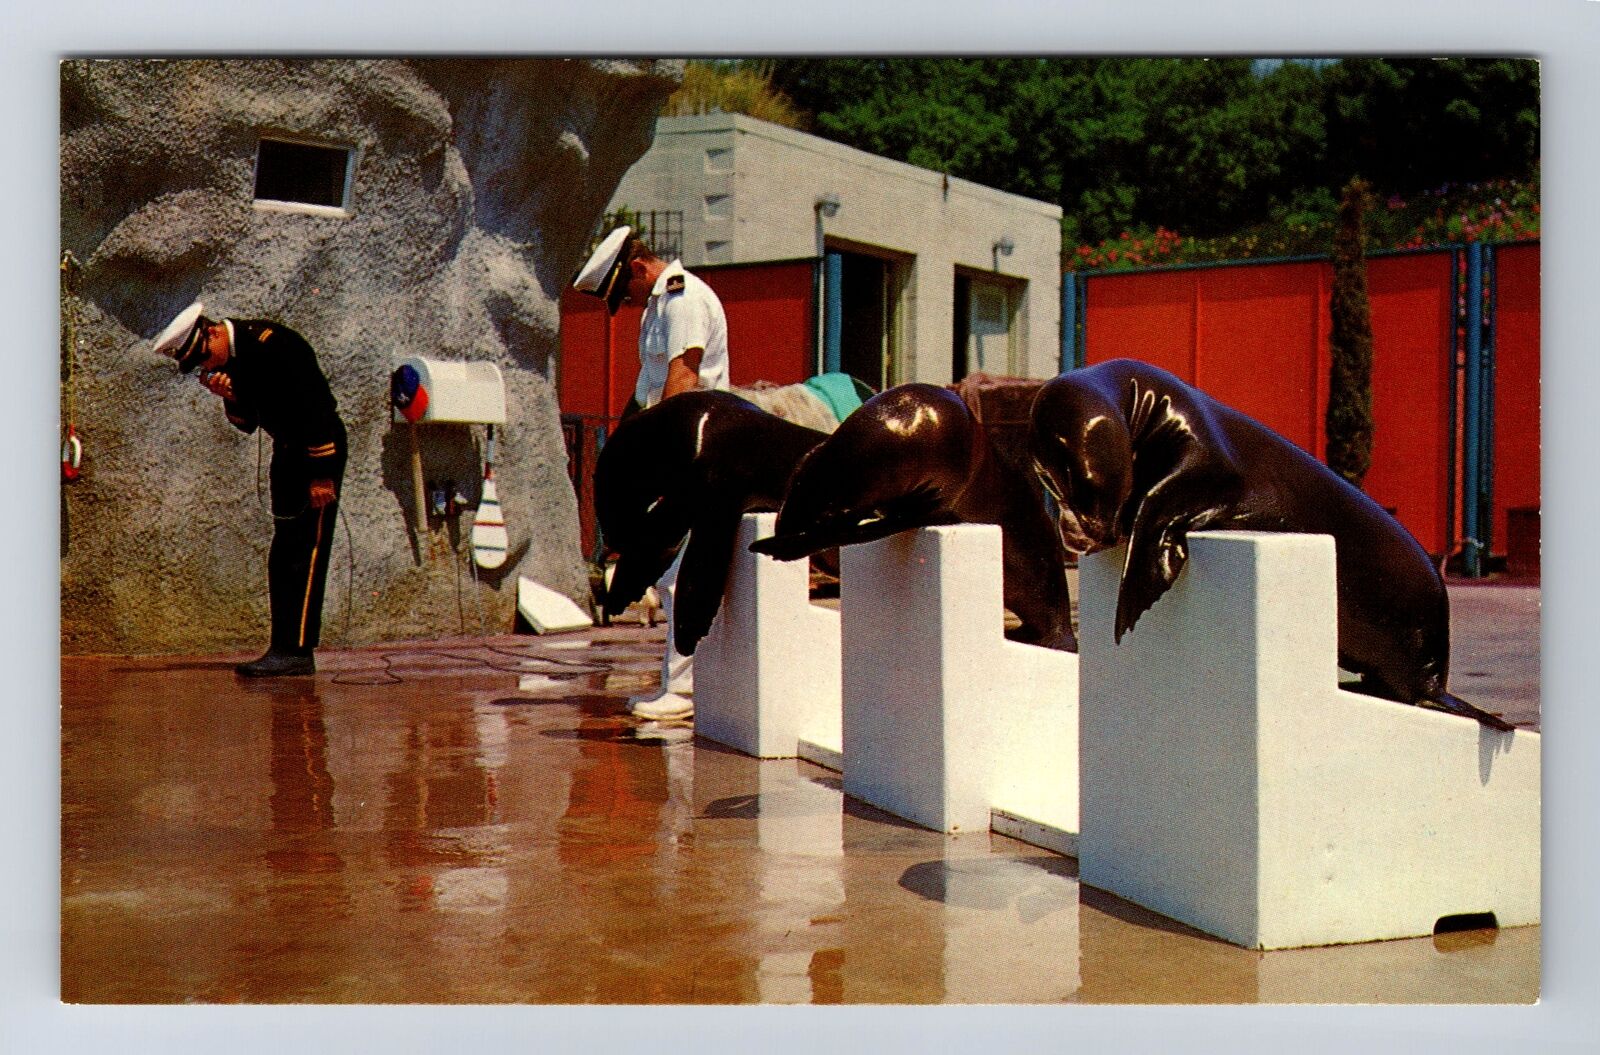 CA-California, Marineland of Pacific, Seal Circus Trained Seals Vintage Postcard